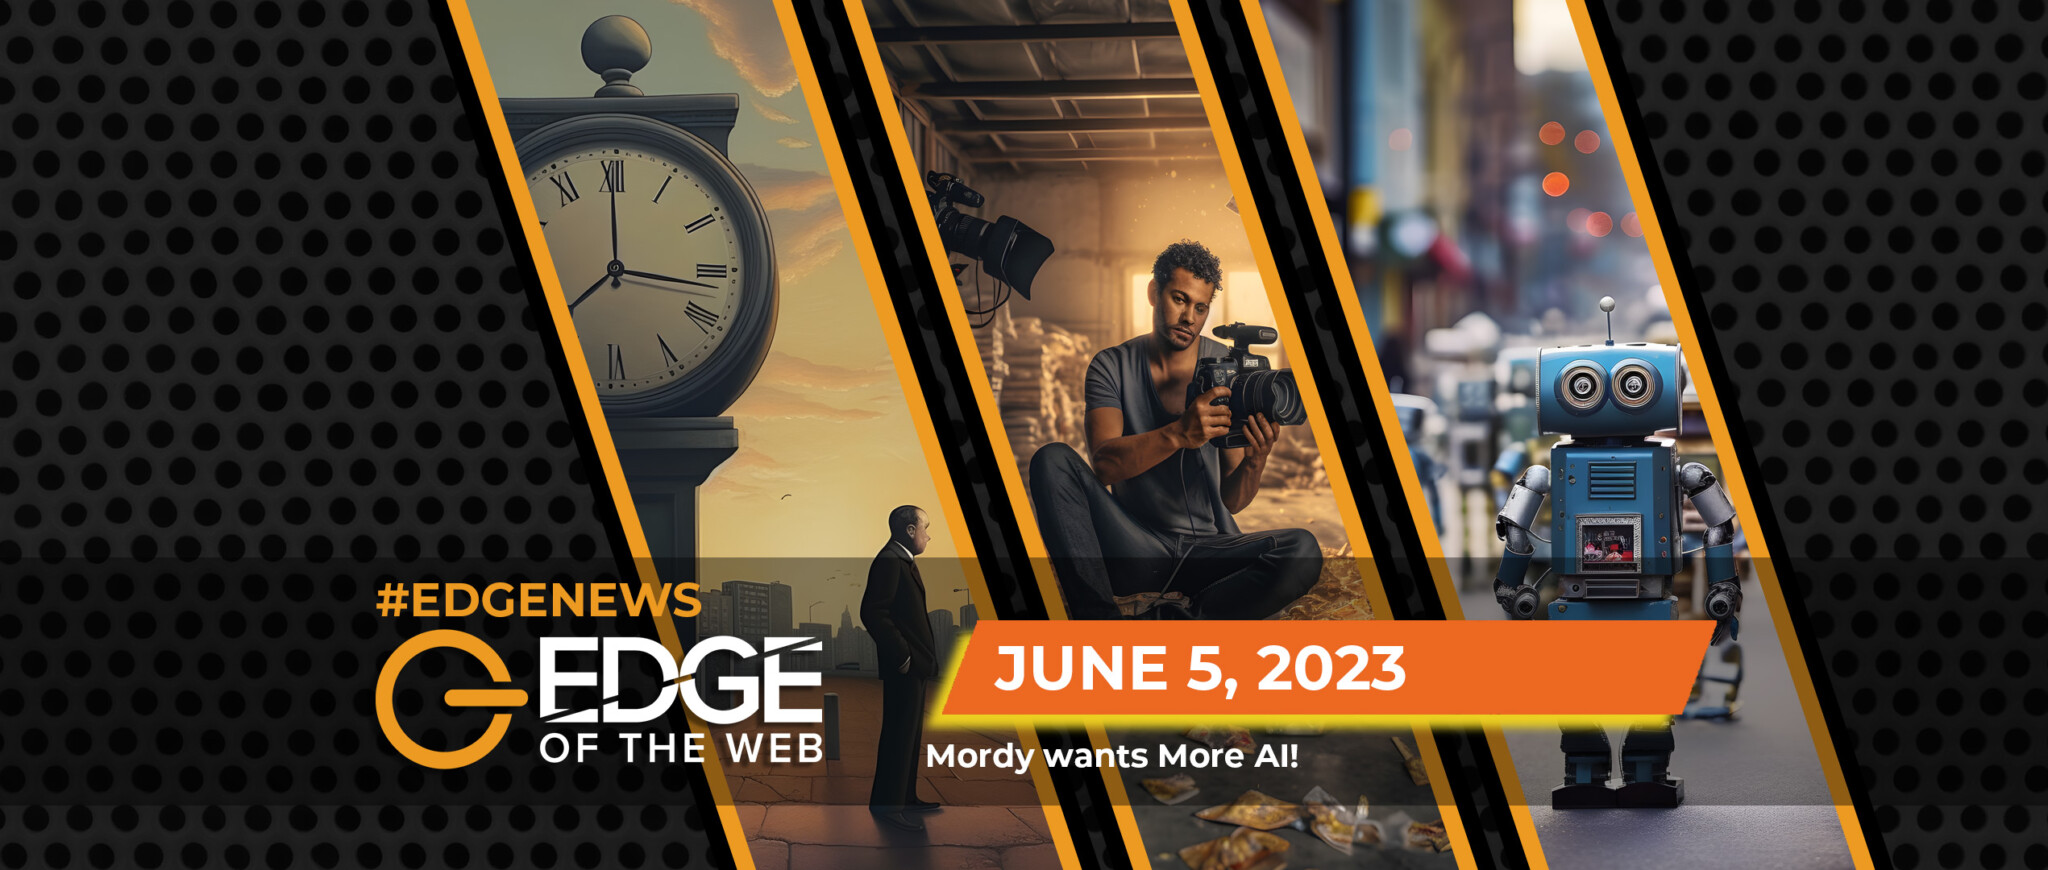 Episode 598: News from June 5th, 2023